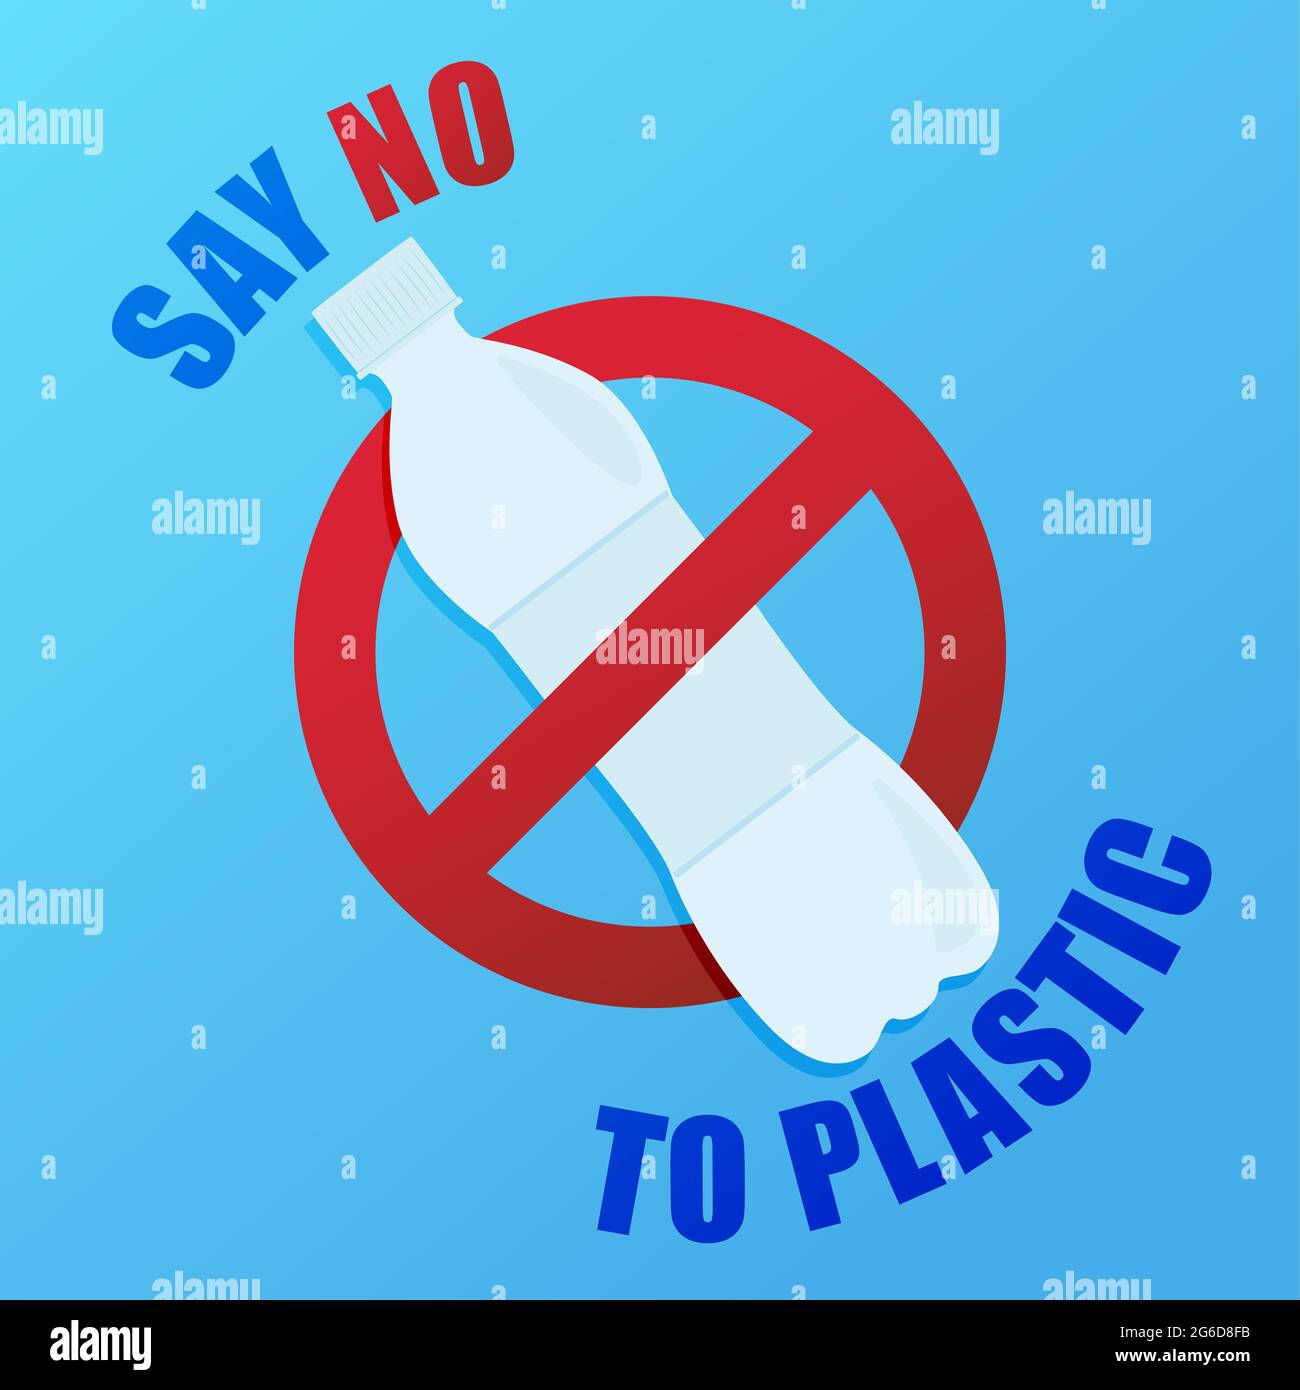 Plastic Bag Ban Poster Vector Images (over 1,200)